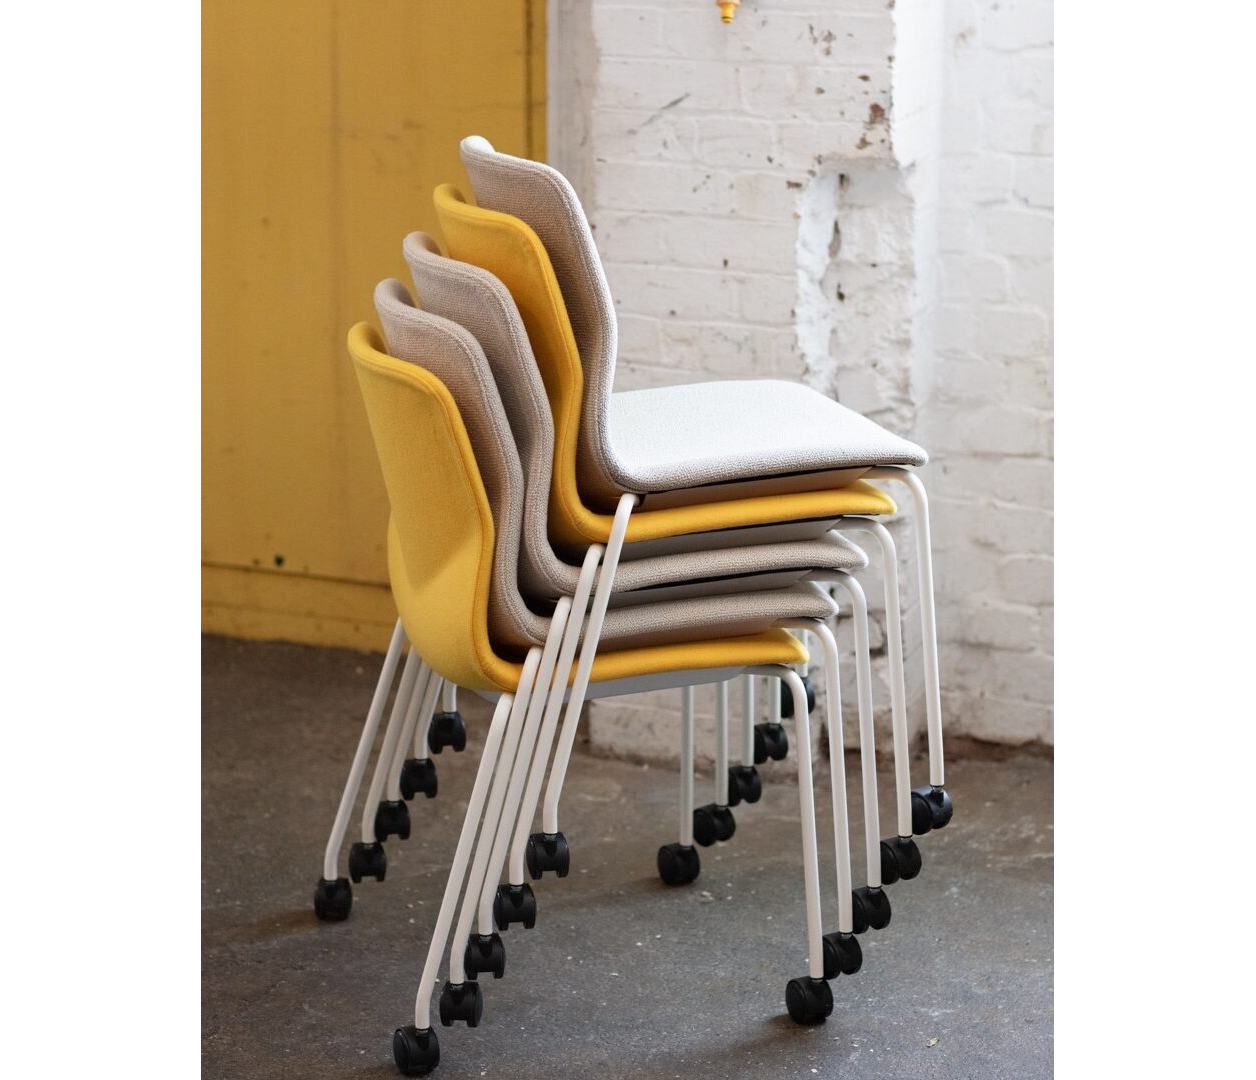 OCEE&FOUR – Chairs – FourSure 77 – Lifestyle Image 13 Large